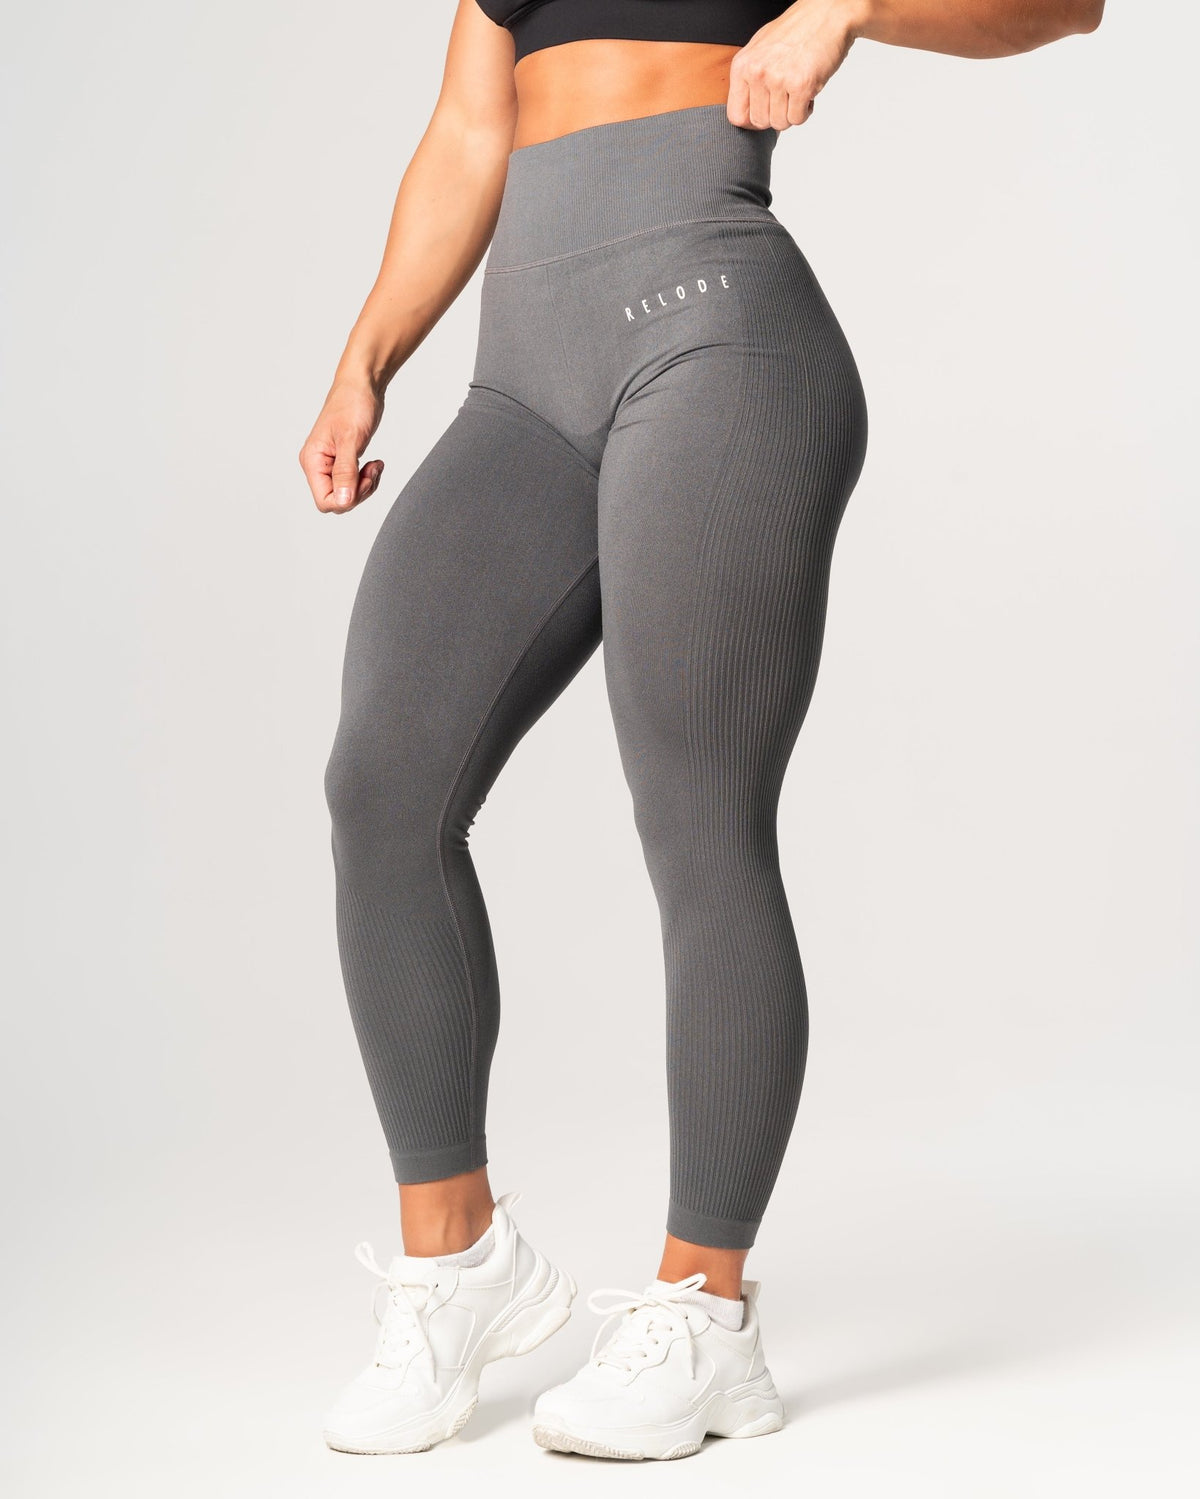 Rise Tights - Grey - RELODE